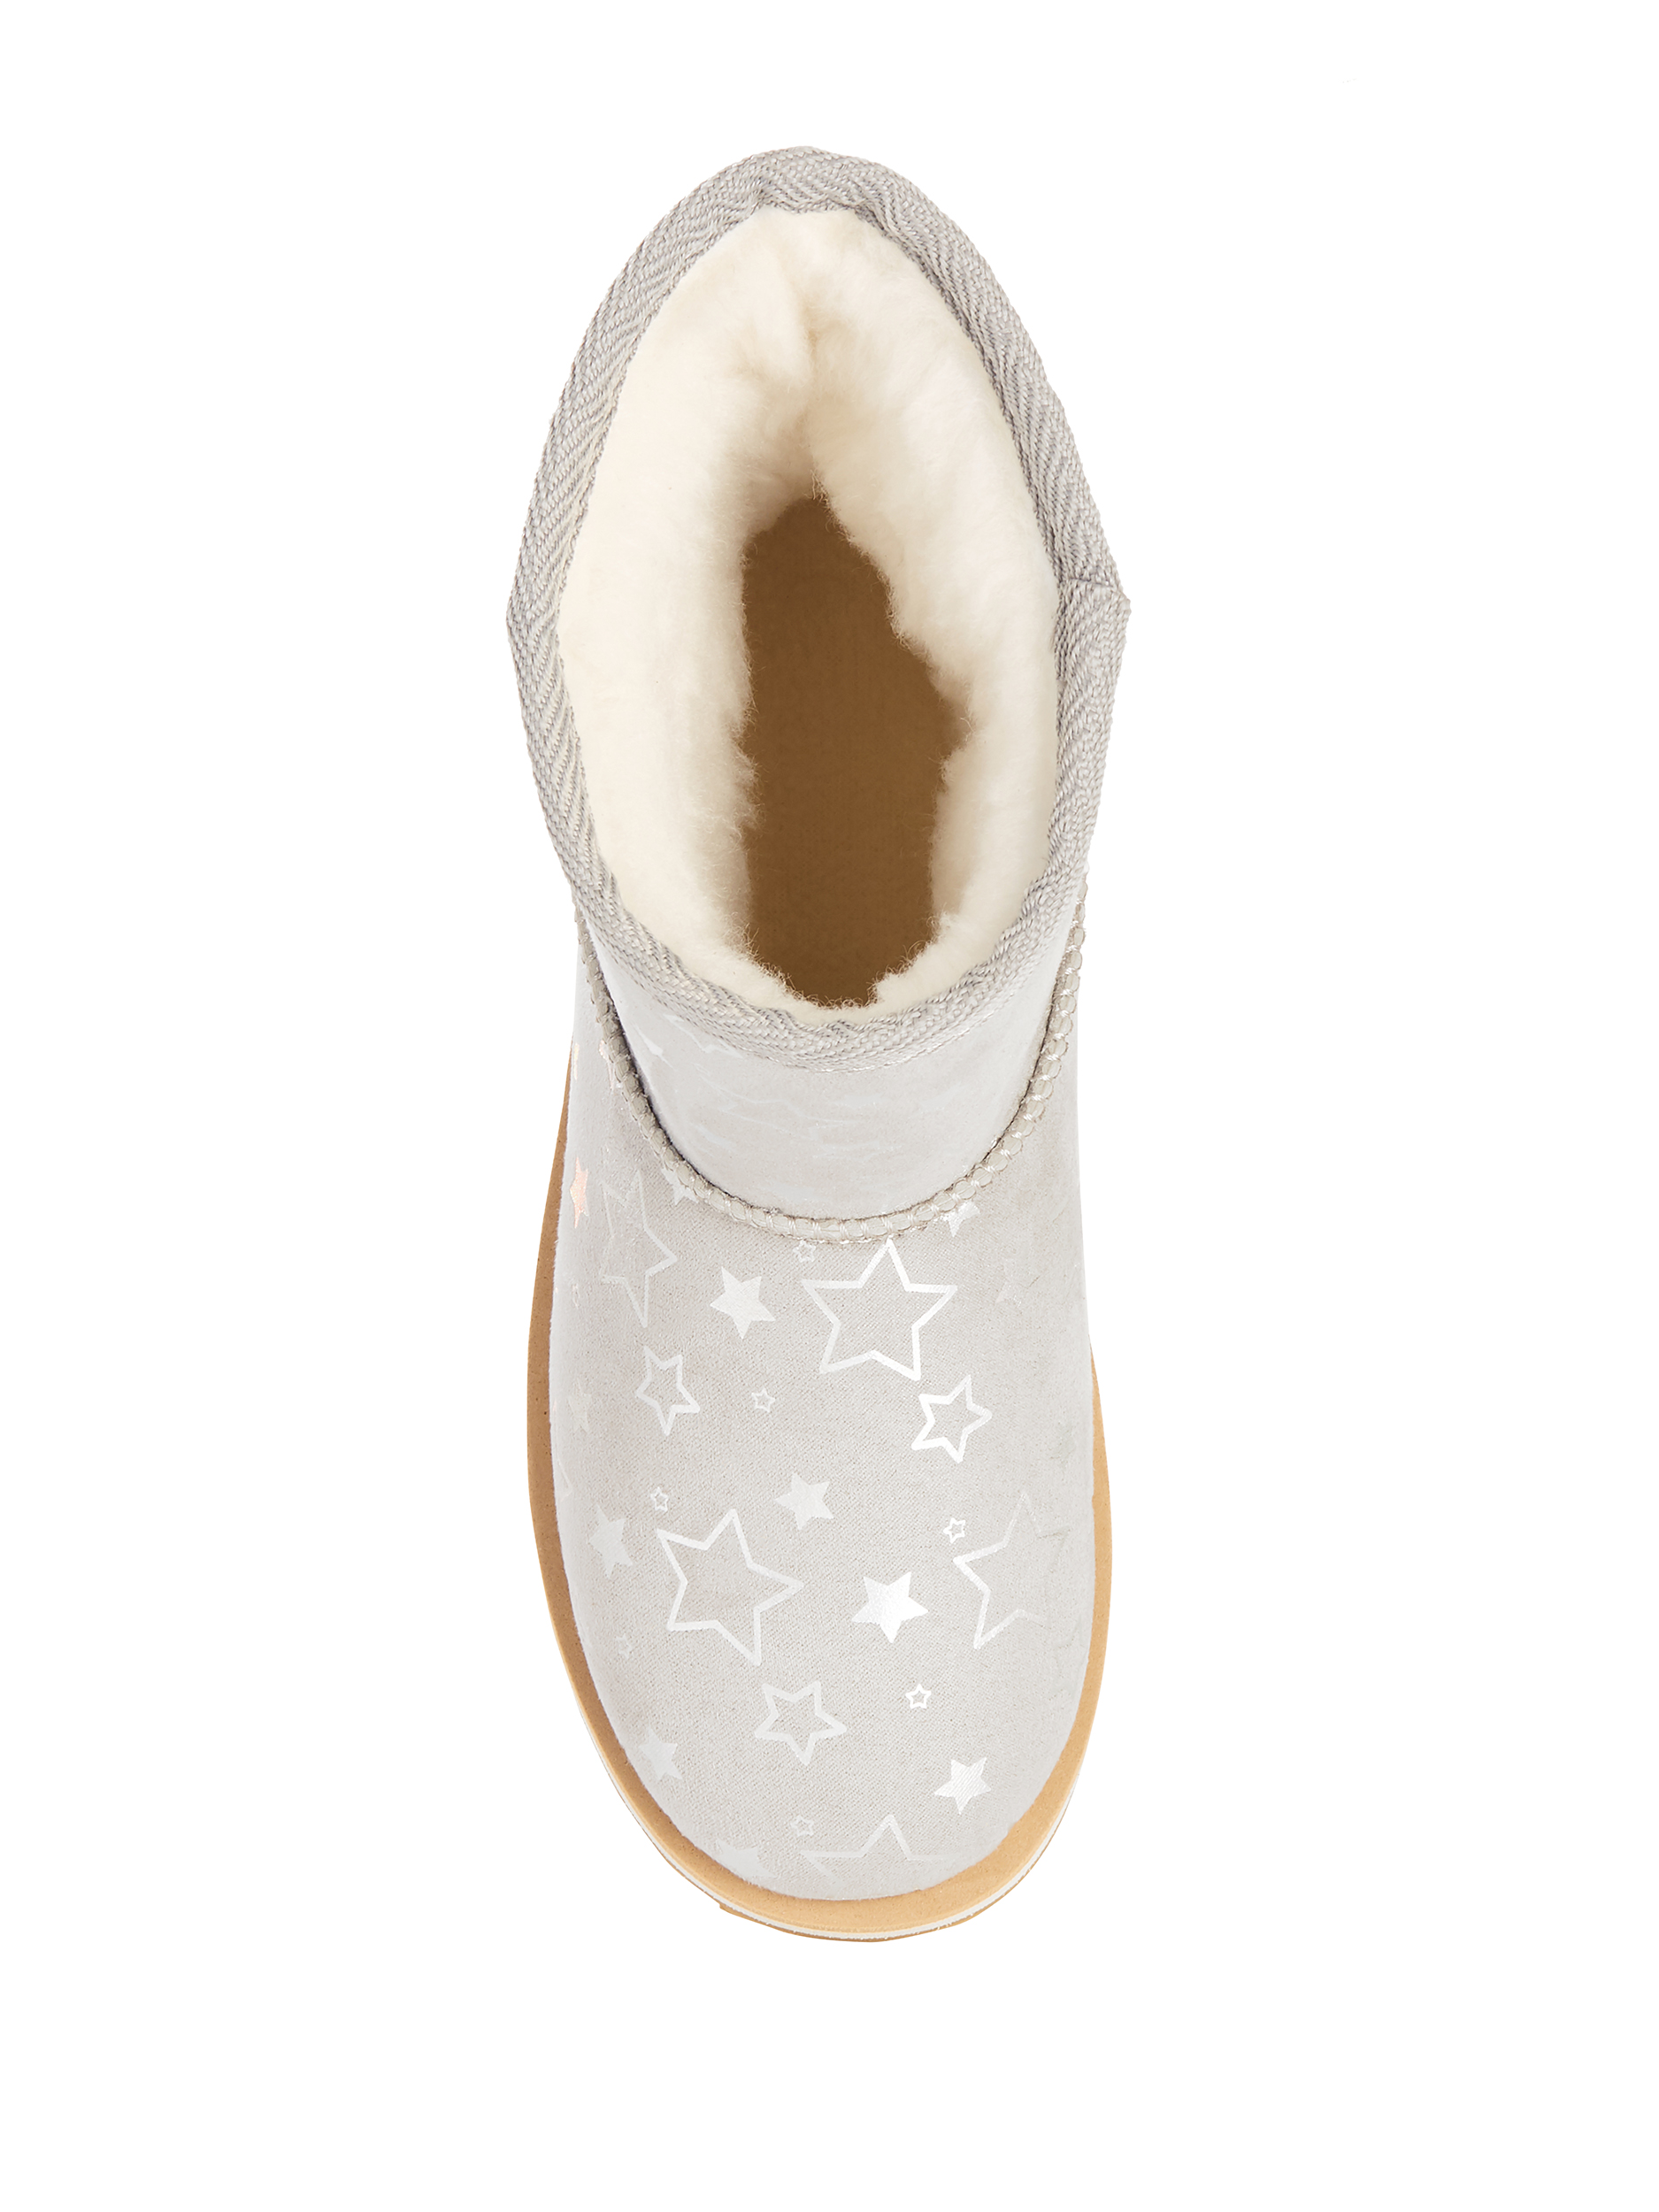 Wonder Nation Girls Faux Shearling Boots - image 4 of 6